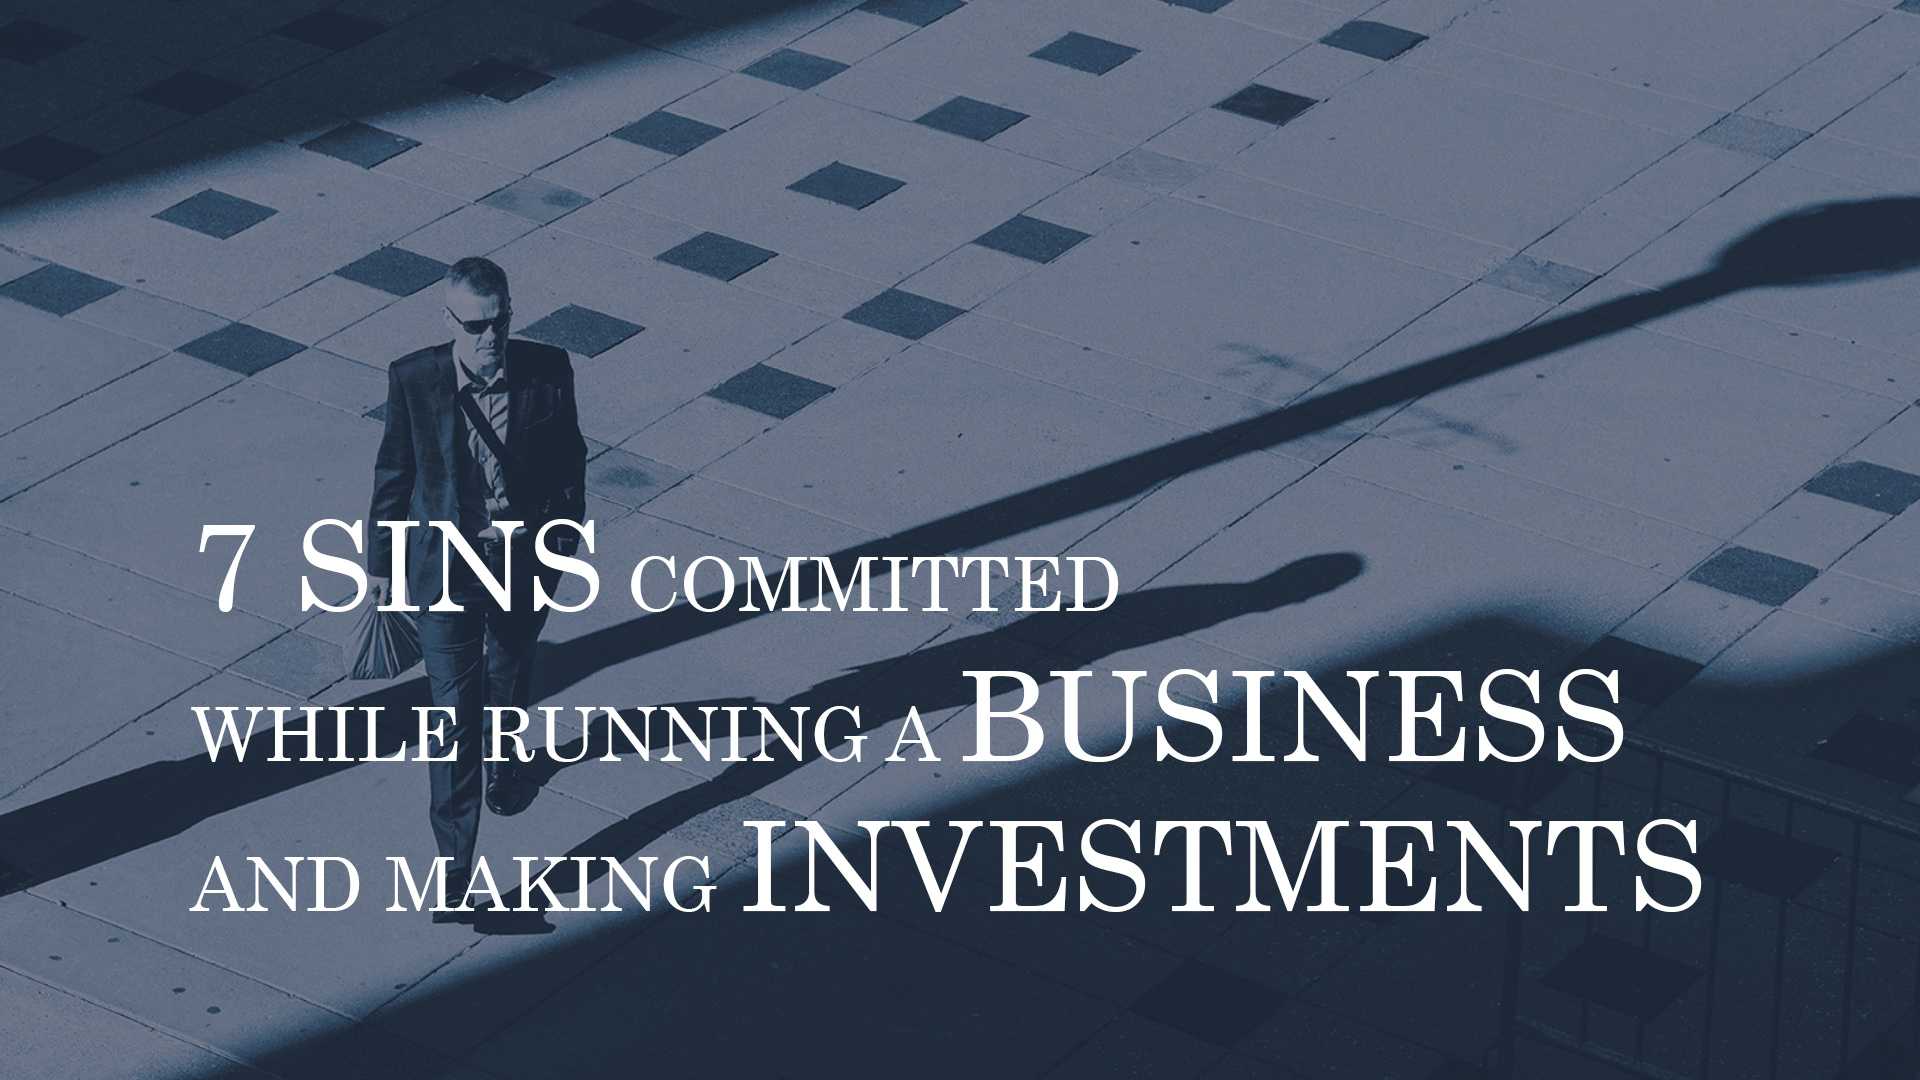 7 SINS COMMITTED WHILE RUNNING A BUSINESS AND MAKING INVESTMENTS